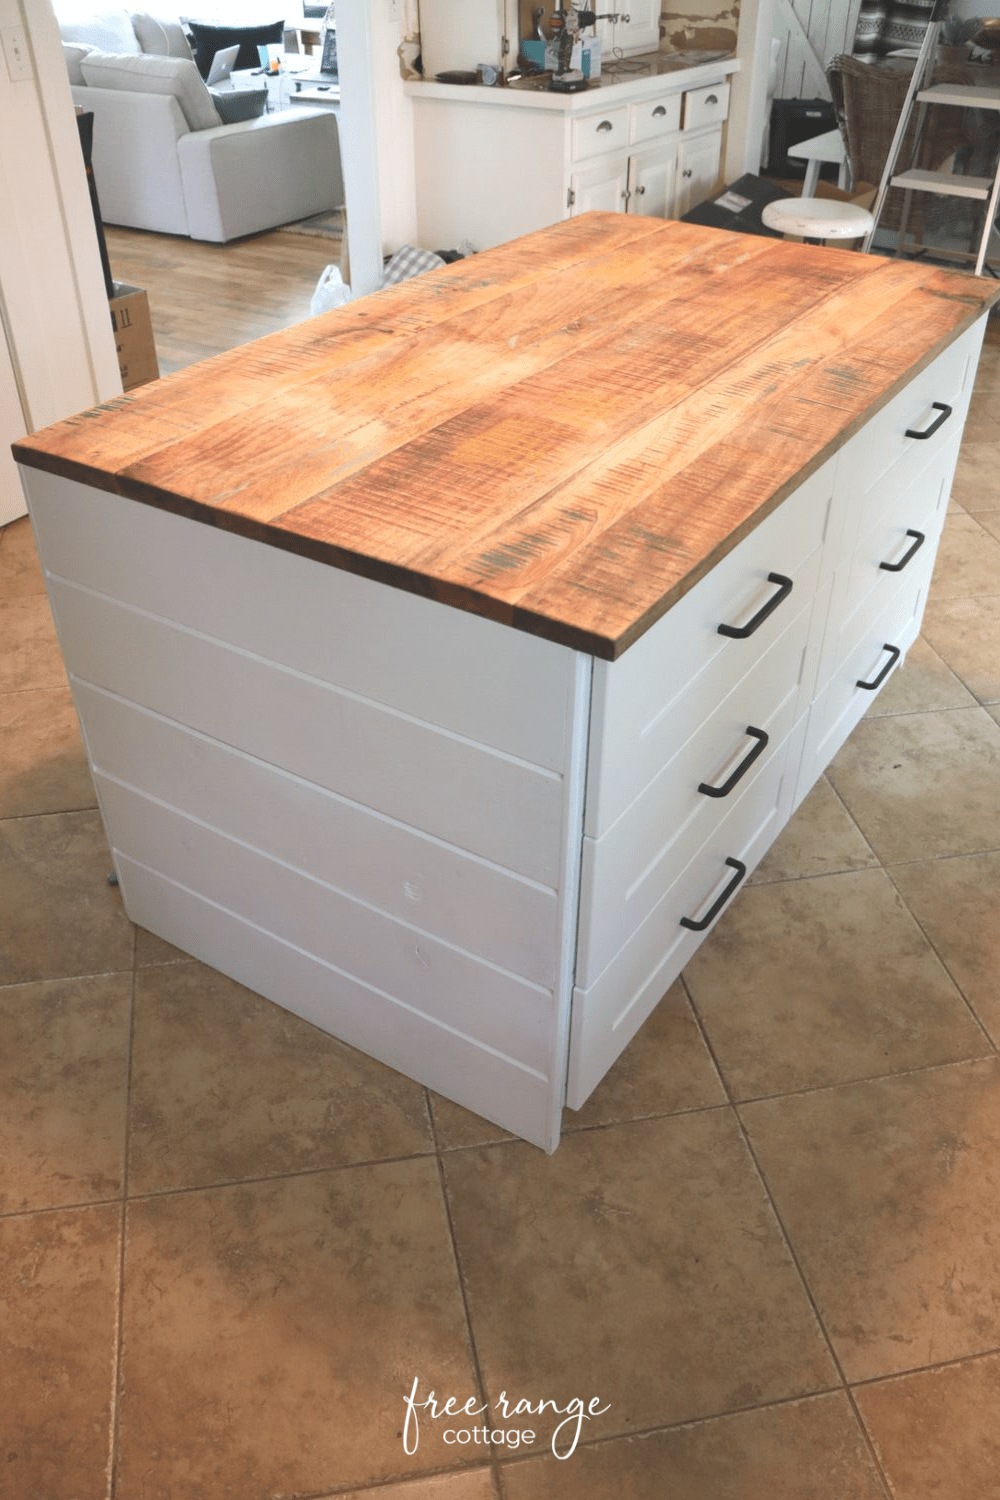 Dismissal Detectable soil Ikea DIY Kitchen Island with Thrifted Counter Top! - Free Range Cottage